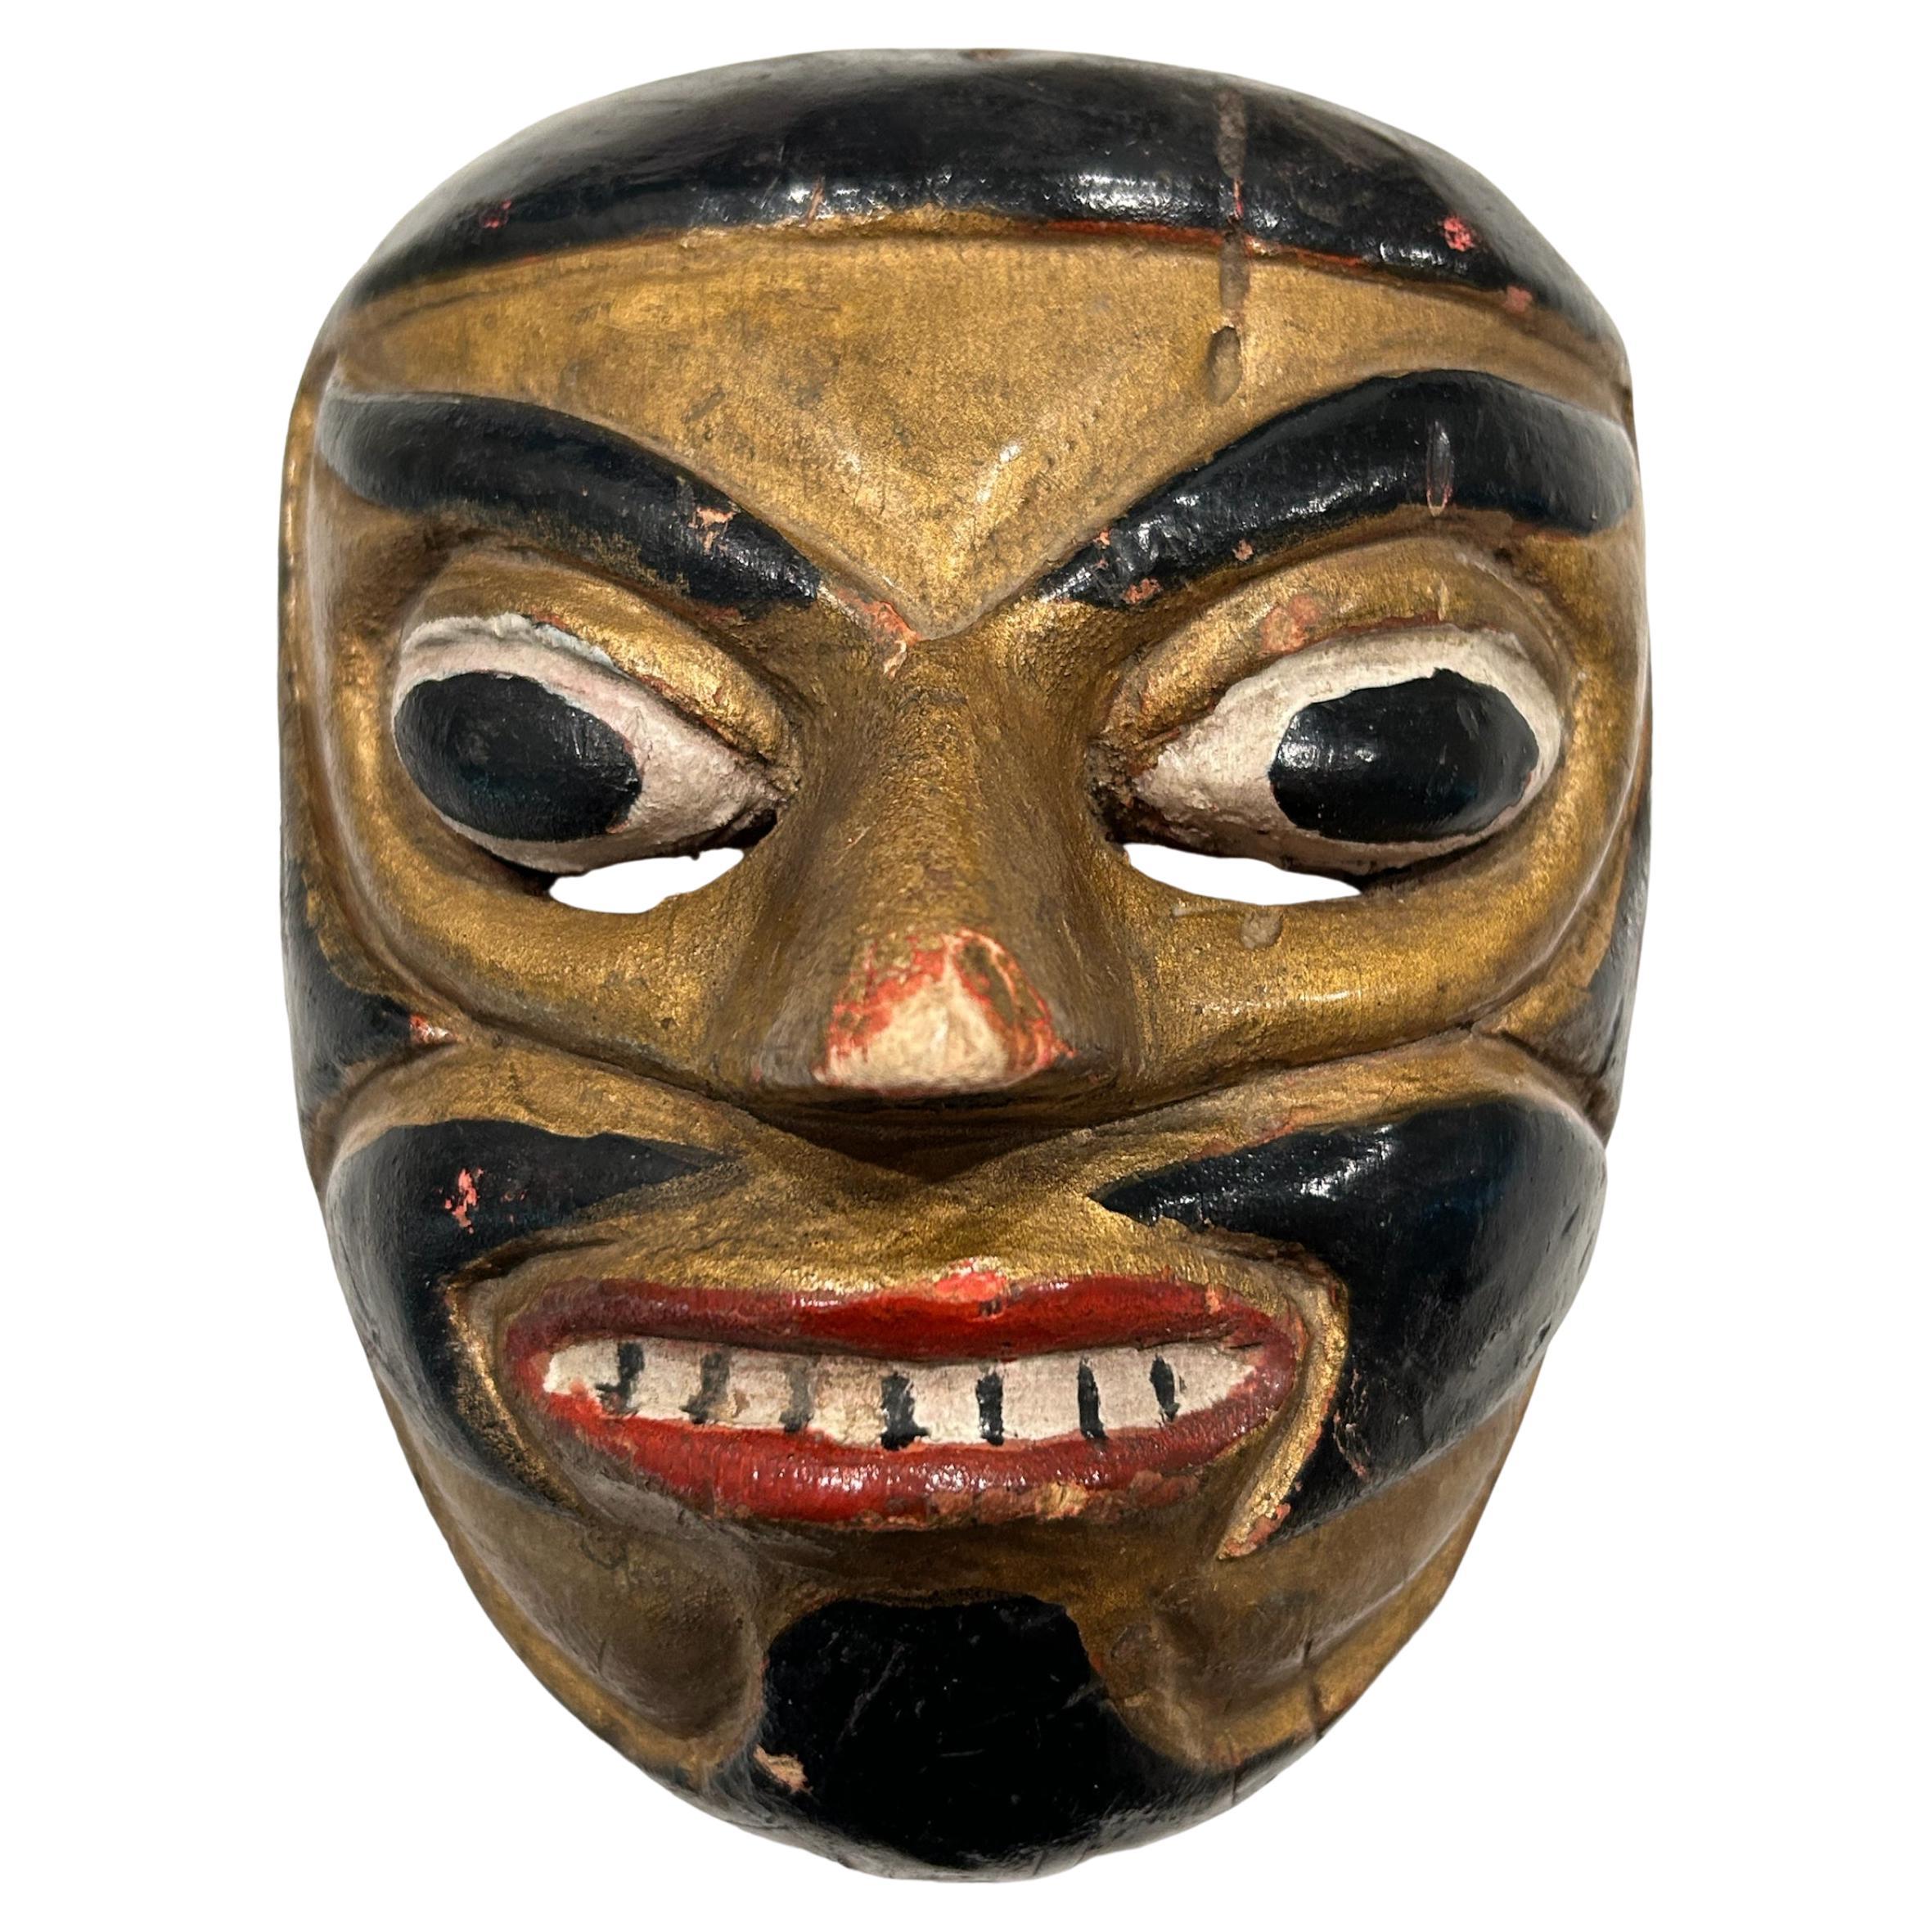 What is an Indonesian mask?